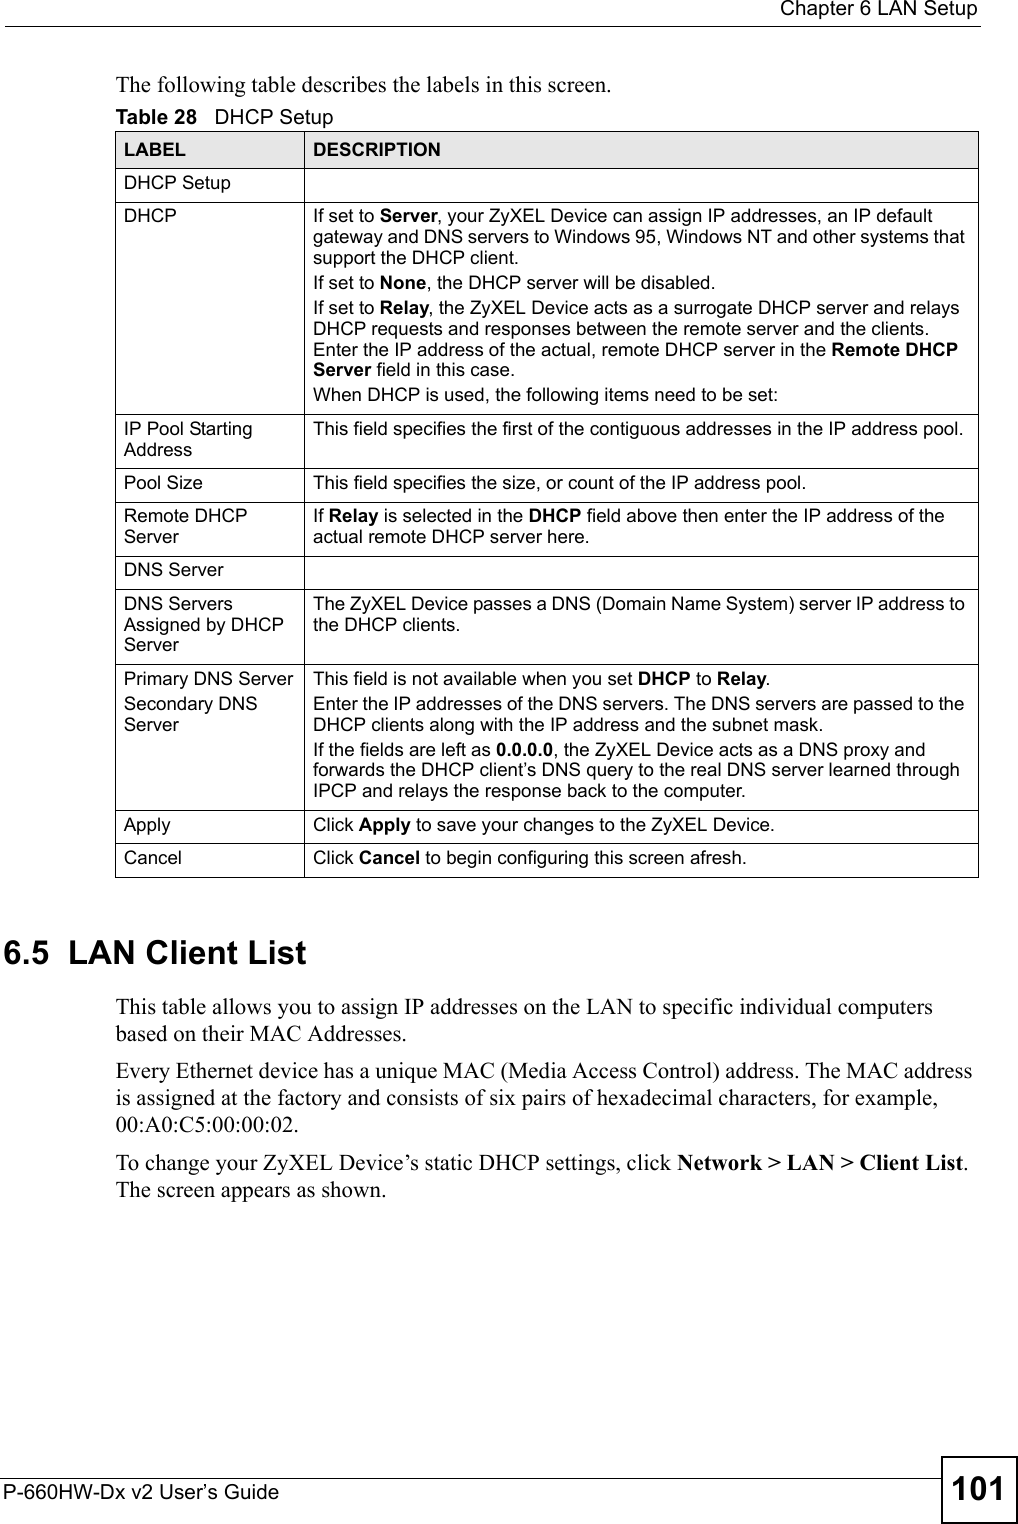  Chapter 6 LAN SetupP-660HW-Dx v2 User’s Guide 101The following table describes the labels in this screen.6.5  LAN Client ListThis table allows you to assign IP addresses on the LAN to specific individual computers based on their MAC Addresses. Every Ethernet device has a unique MAC (Media Access Control) address. The MAC address is assigned at the factory and consists of six pairs of hexadecimal characters, for example, 00:A0:C5:00:00:02.To change your ZyXEL Device’s static DHCP settings, click Network &gt; LAN &gt; Client List. The screen appears as shown.Table 28   DHCP SetupLABEL DESCRIPTIONDHCP SetupDHCP If set to Server, your ZyXEL Device can assign IP addresses, an IP default gateway and DNS servers to Windows 95, Windows NT and other systems that support the DHCP client.If set to None, the DHCP server will be disabled. If set to Relay, the ZyXEL Device acts as a surrogate DHCP server and relays DHCP requests and responses between the remote server and the clients. Enter the IP address of the actual, remote DHCP server in the Remote DHCP Server field in this case. When DHCP is used, the following items need to be set: IP Pool Starting AddressThis field specifies the first of the contiguous addresses in the IP address pool.Pool Size This field specifies the size, or count of the IP address pool.Remote DHCP ServerIf Relay is selected in the DHCP field above then enter the IP address of the actual remote DHCP server here.DNS ServerDNS Servers Assigned by DHCP ServerThe ZyXEL Device passes a DNS (Domain Name System) server IP address to the DHCP clients. Primary DNS ServerSecondary DNS ServerThis field is not available when you set DHCP to Relay.Enter the IP addresses of the DNS servers. The DNS servers are passed to the DHCP clients along with the IP address and the subnet mask.If the fields are left as 0.0.0.0, the ZyXEL Device acts as a DNS proxy and forwards the DHCP client’s DNS query to the real DNS server learned through IPCP and relays the response back to the computer.Apply Click Apply to save your changes to the ZyXEL Device.Cancel Click Cancel to begin configuring this screen afresh.